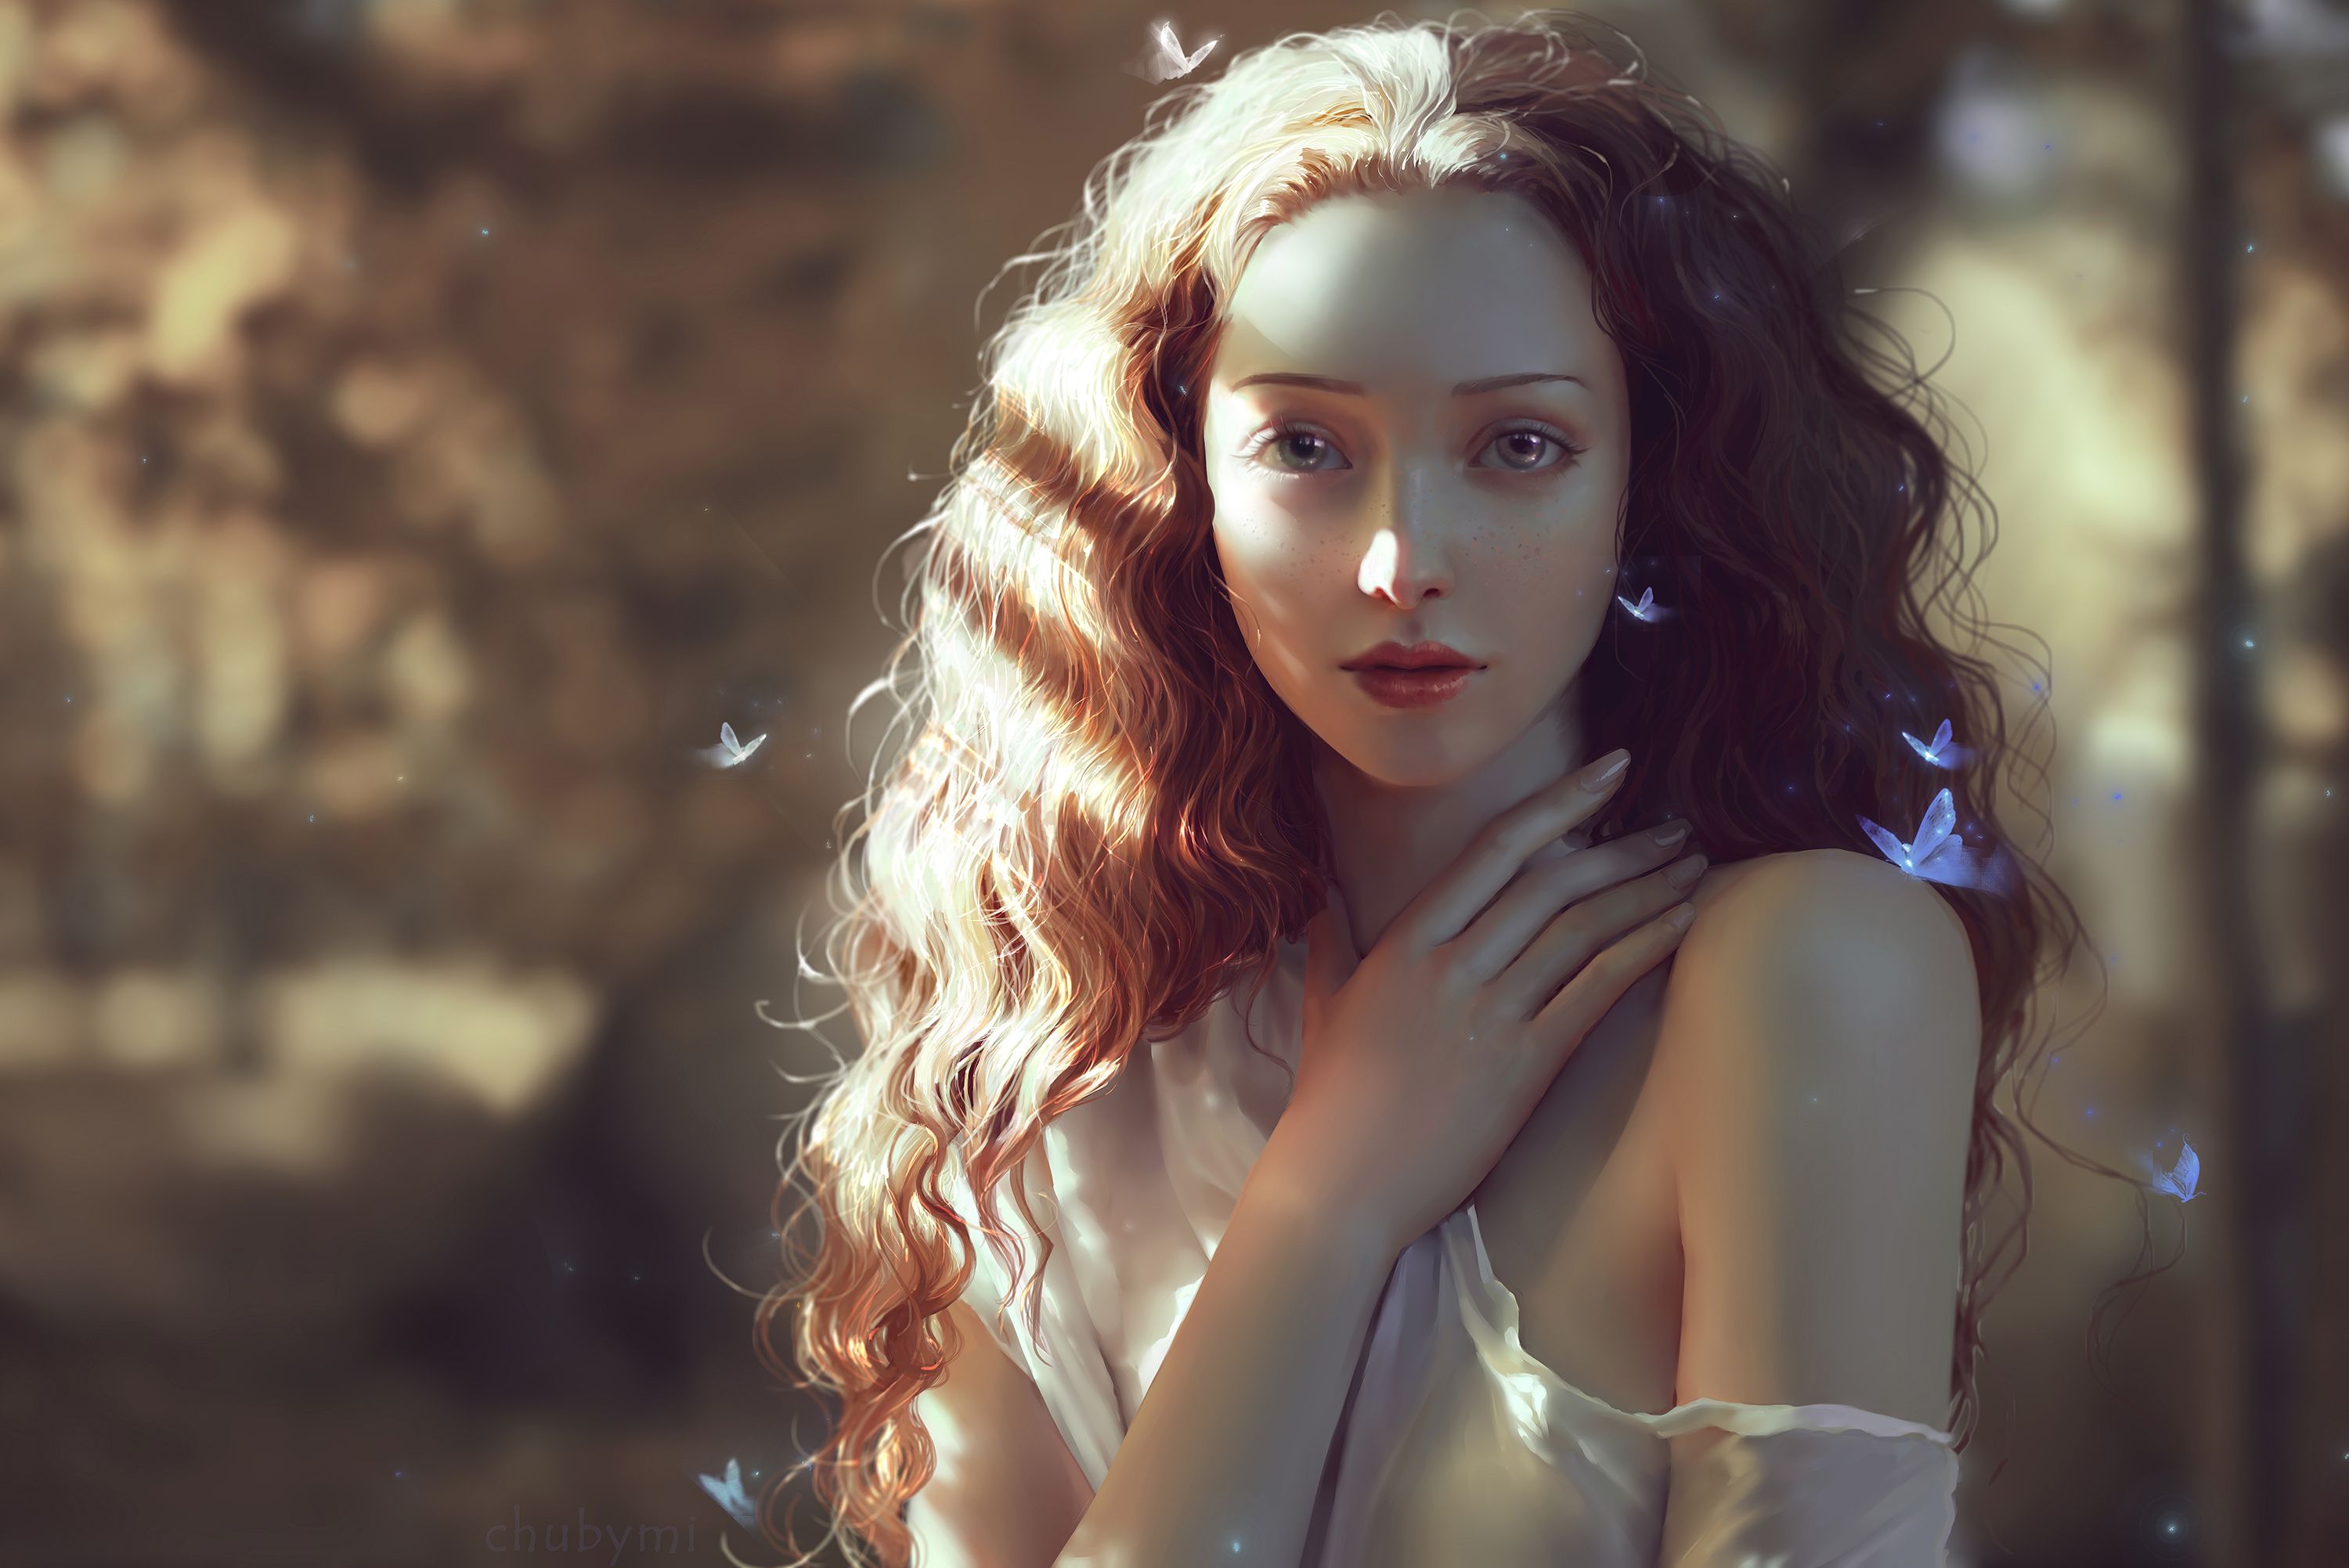 Beautiful Fantasy Angel, HD Fantasy Girls, 4k Wallpaper, Image, Background, Photo and Picture